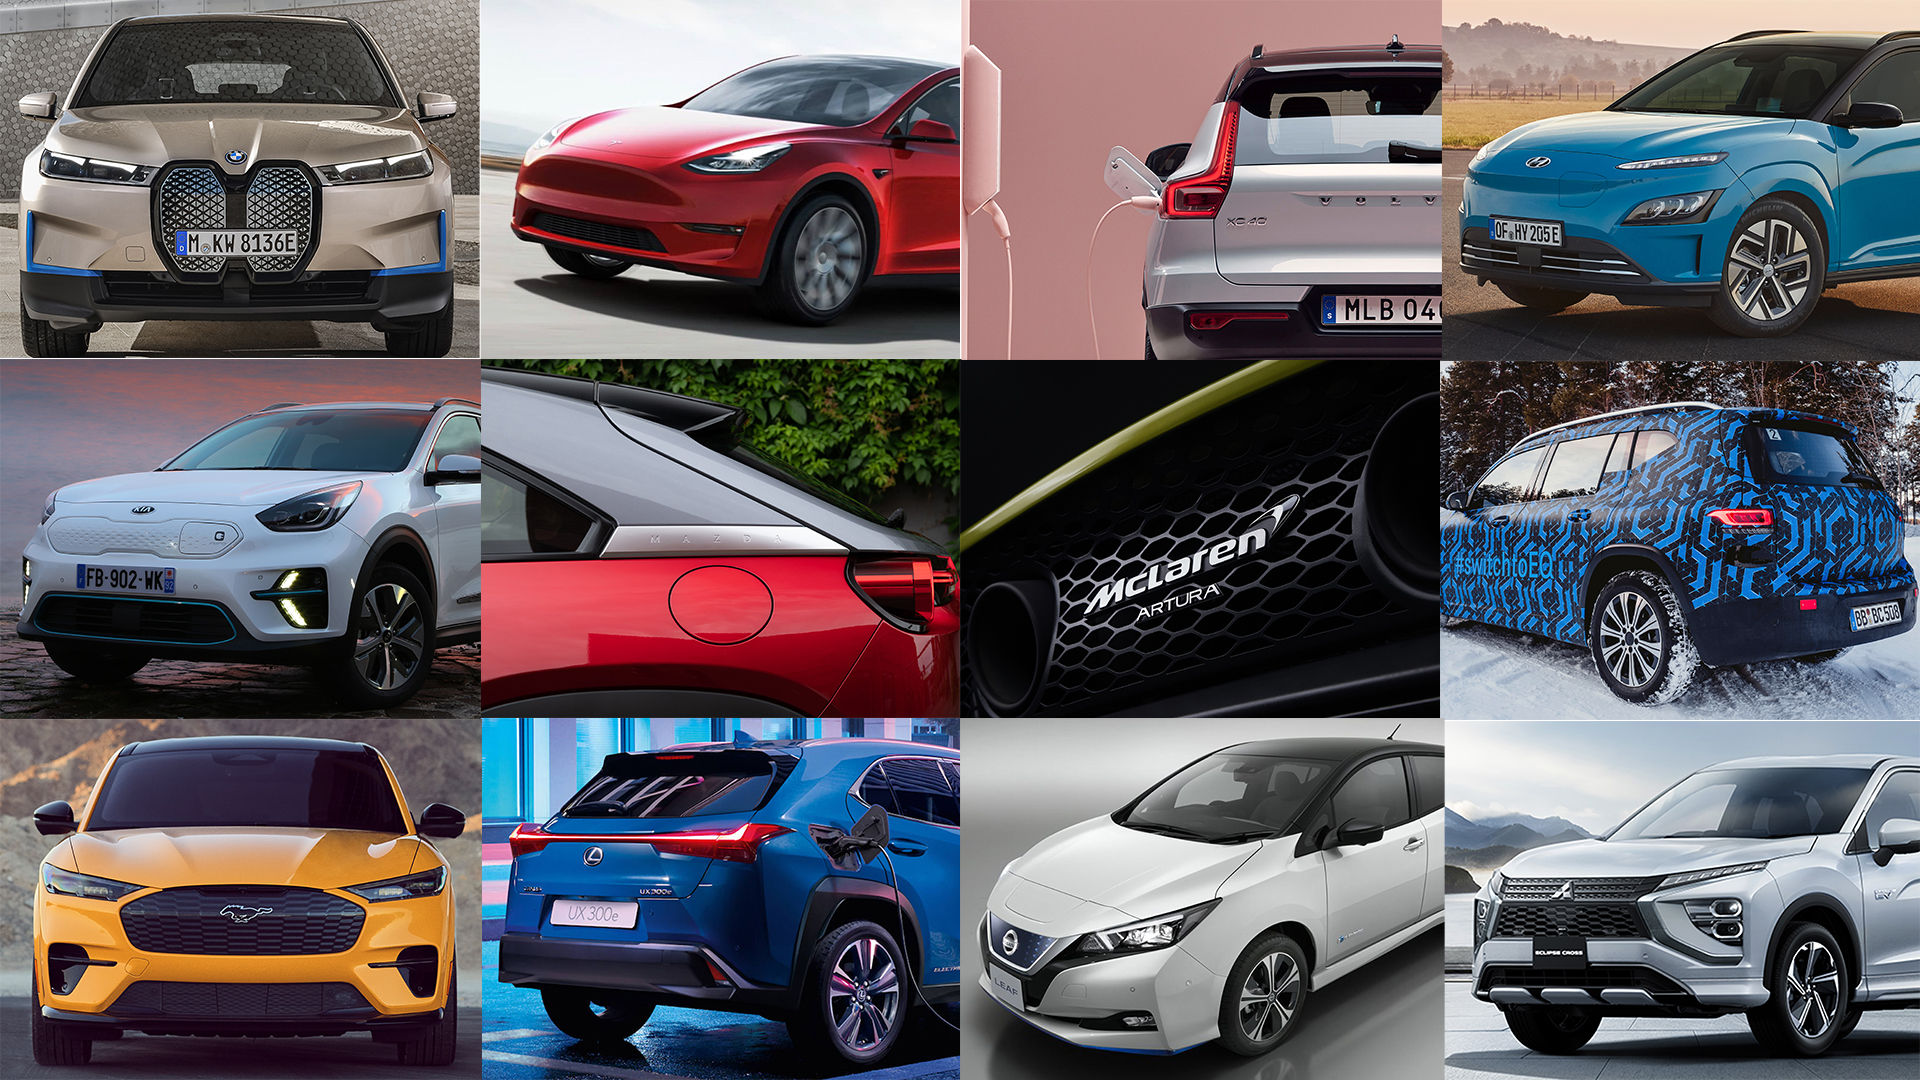 Every EV and plug-in hybrid car coming to Australia in 2021 - EV Central